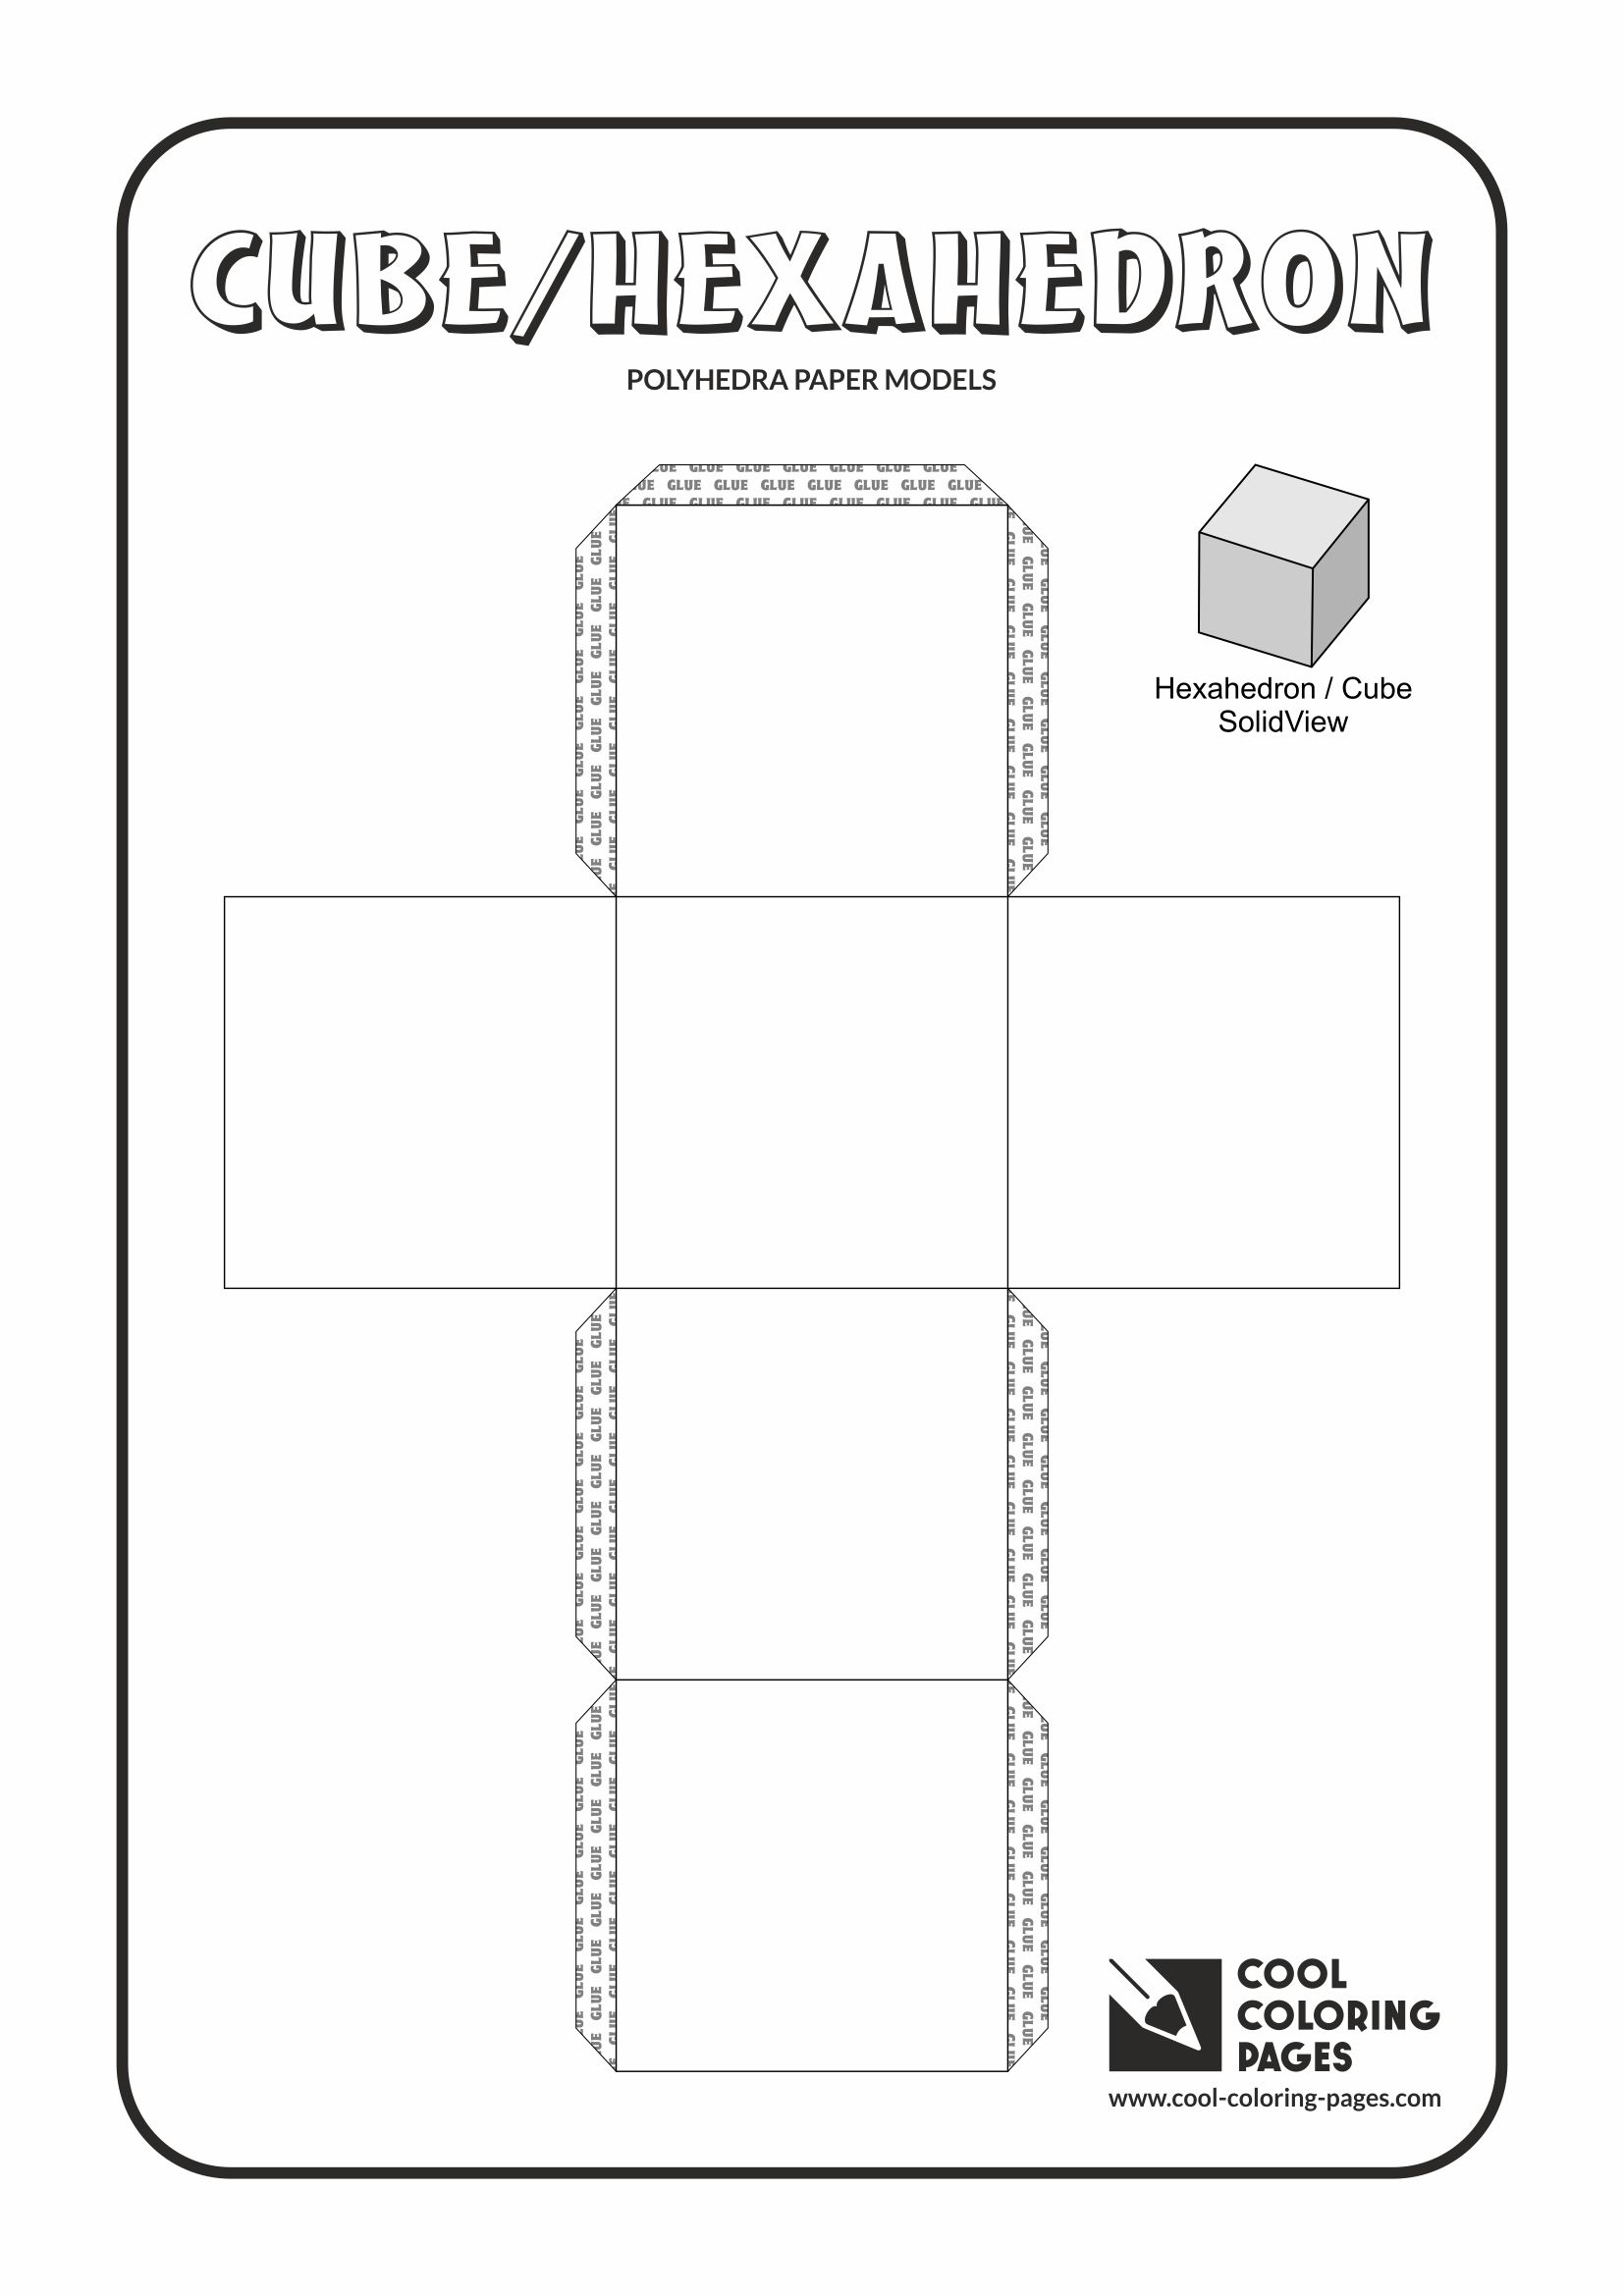 Cool coloring pages cube